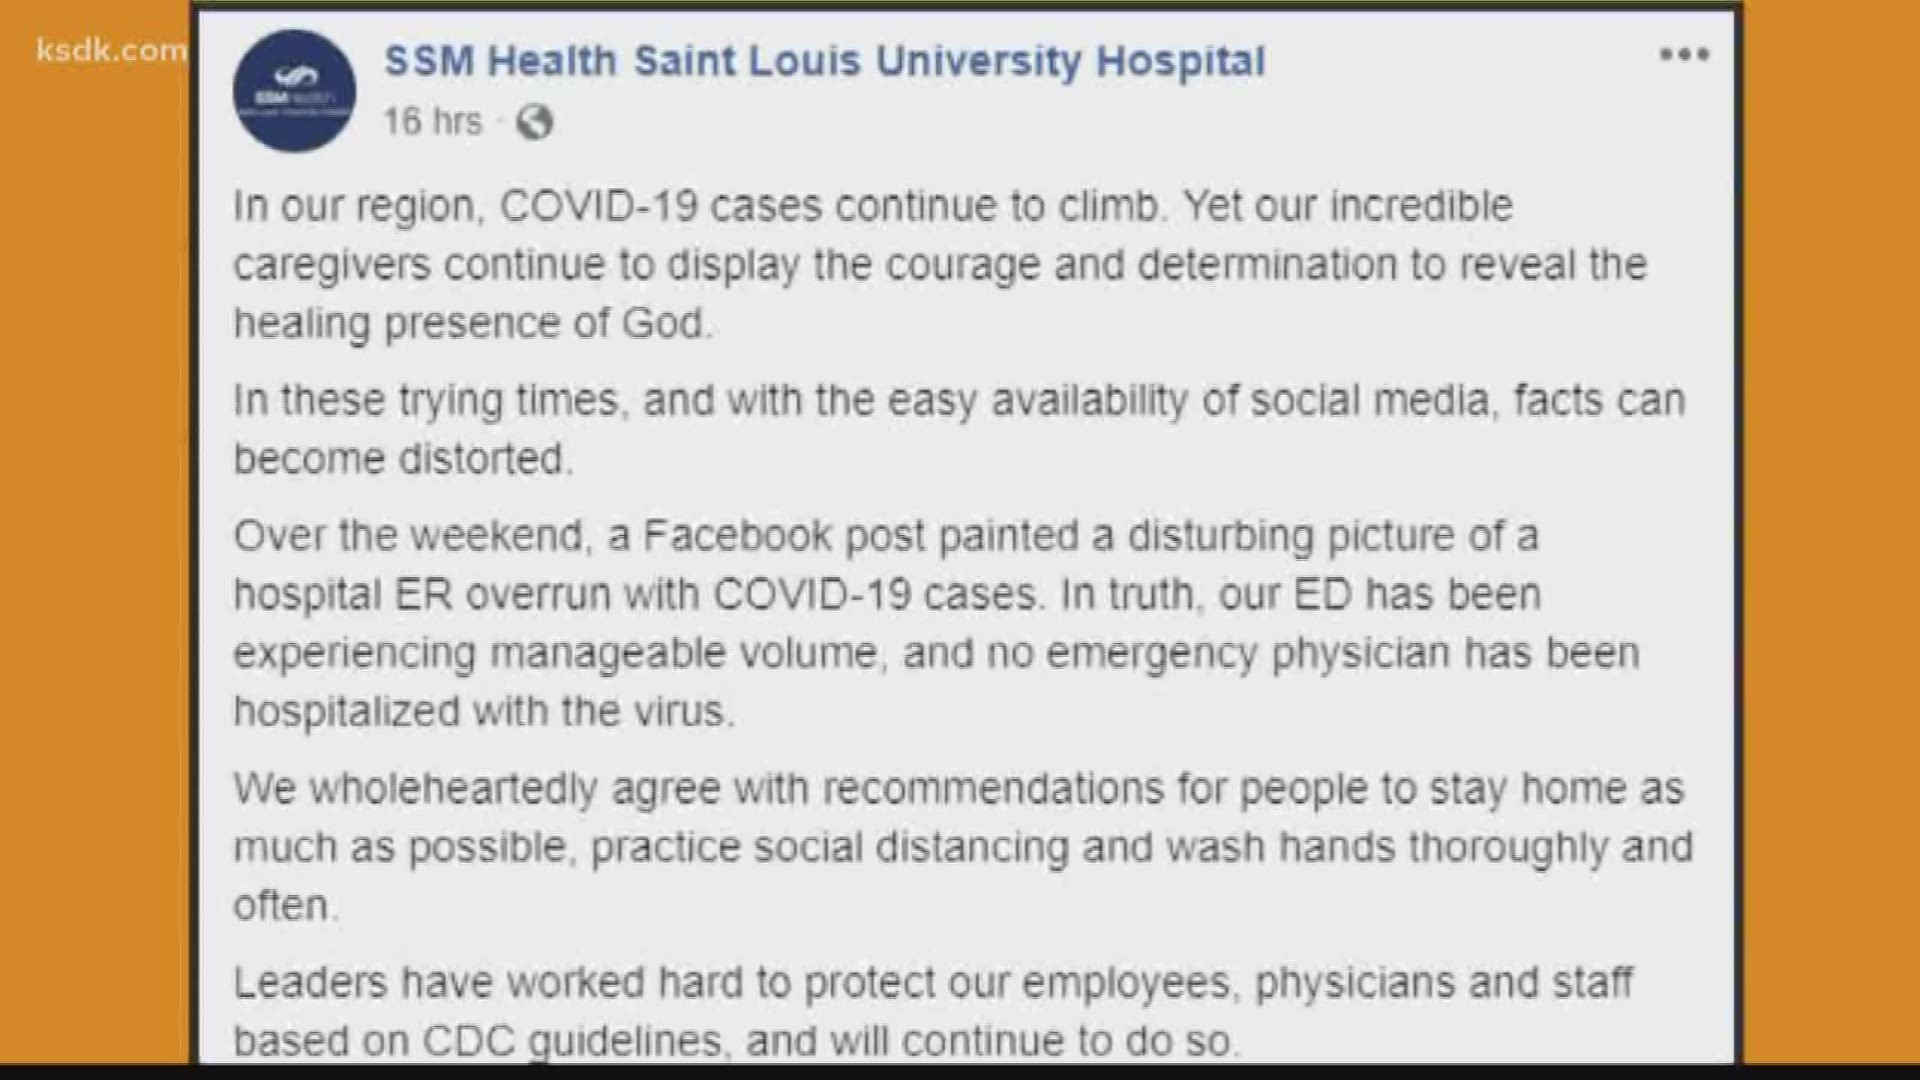 SSM Health has denied the claims in the post